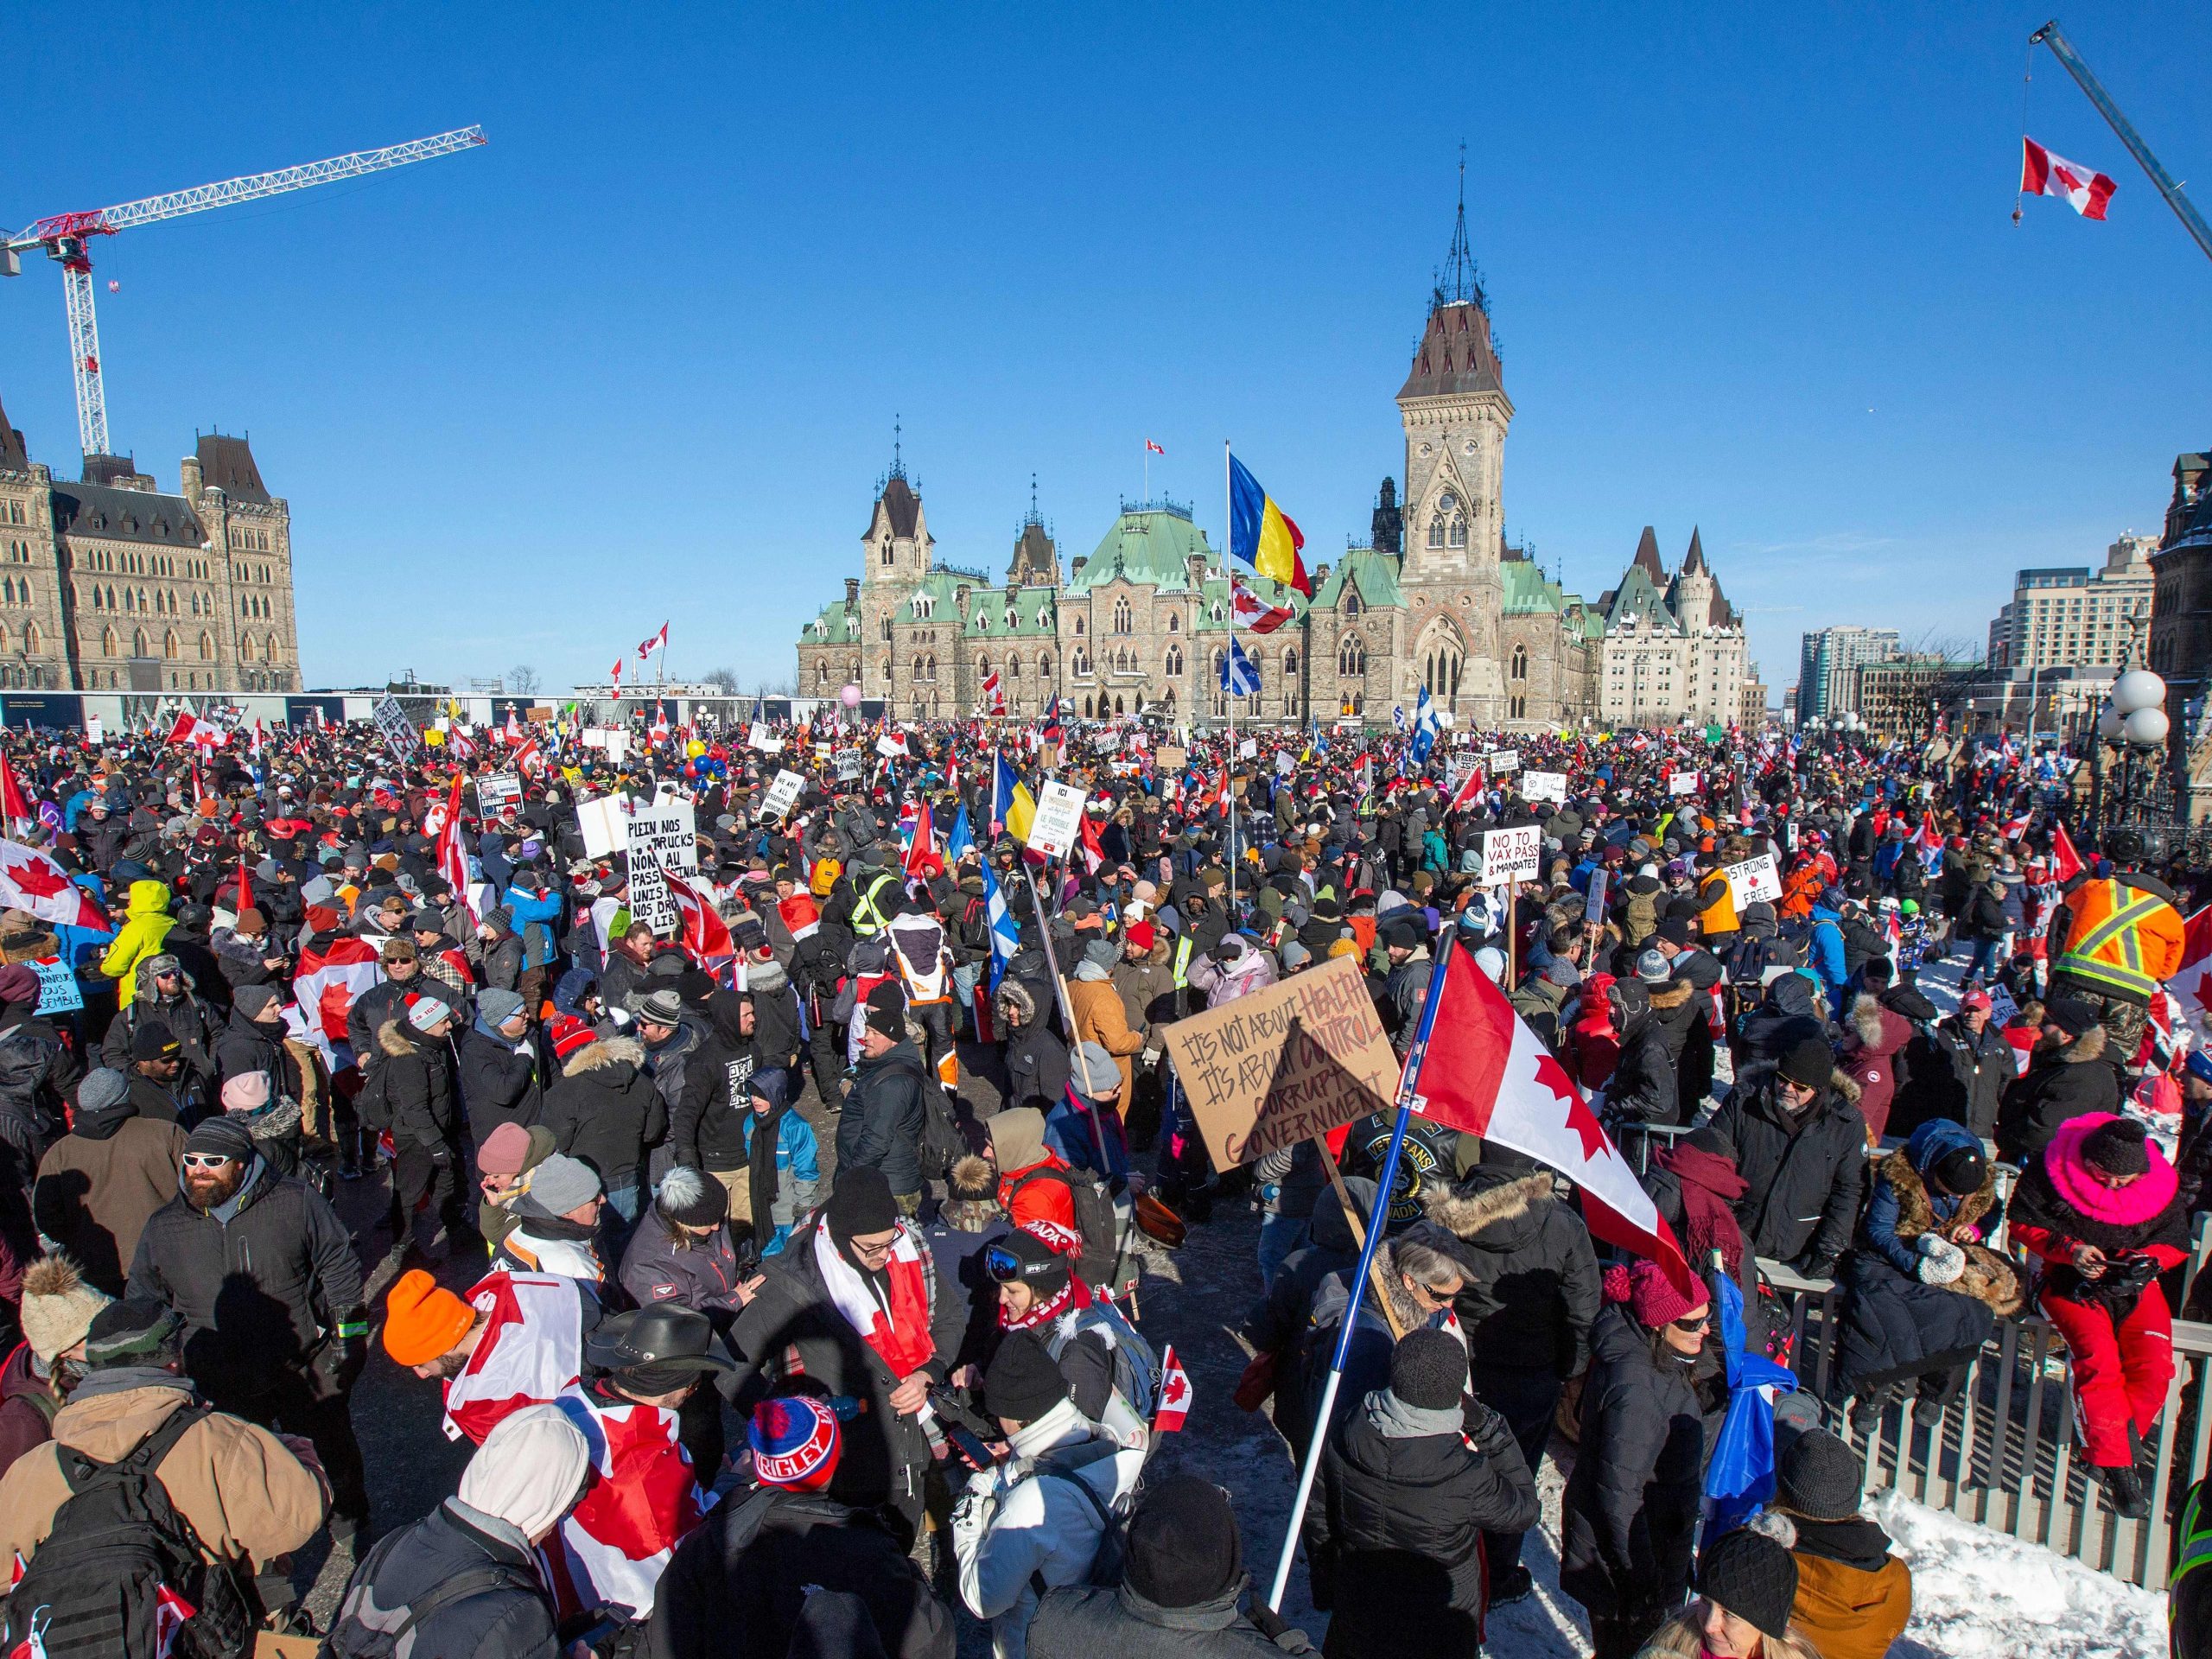 Supporters fill the street at Parliament Hill for the Freedom Truck Convoy to protest against Covid-19 vaccine mandates and restrictions in Ottawa, Canada, on January 29, 2022.